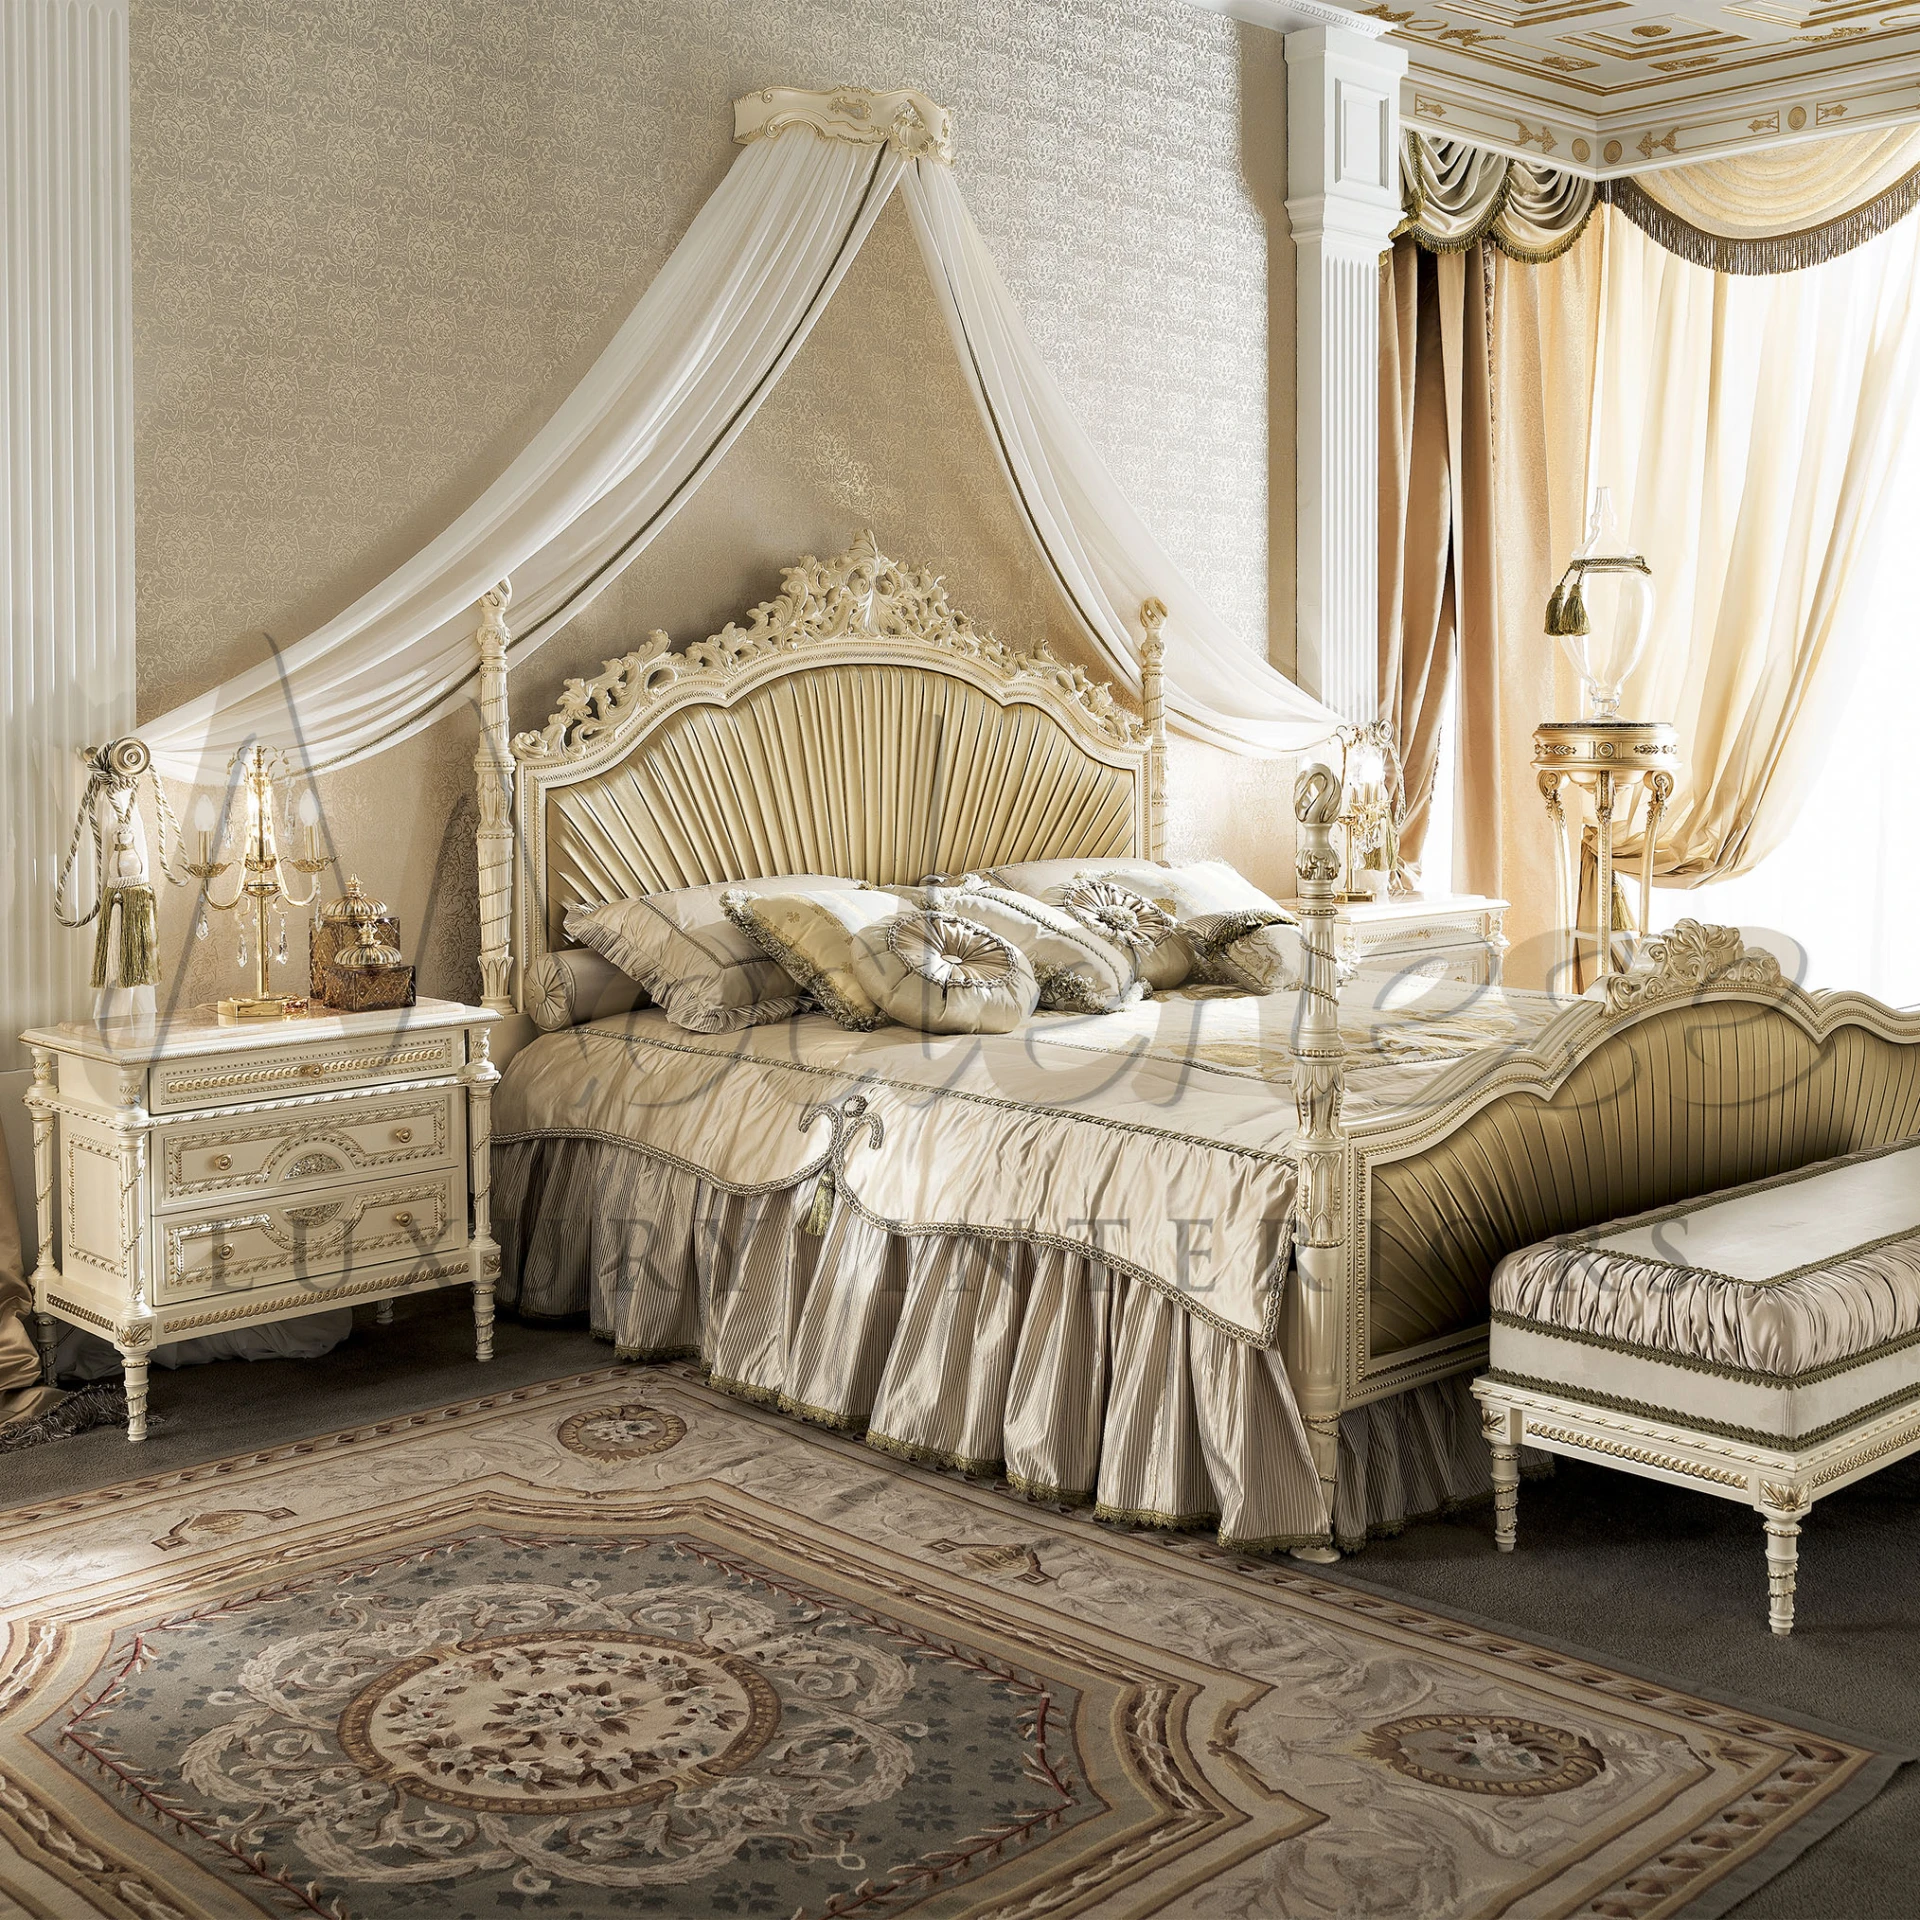 A regal bedroom featuring Modenese Furniture Manufacturer's nightstand with gold accents and marble top, matching the grand bed and elegant, draped canopy.